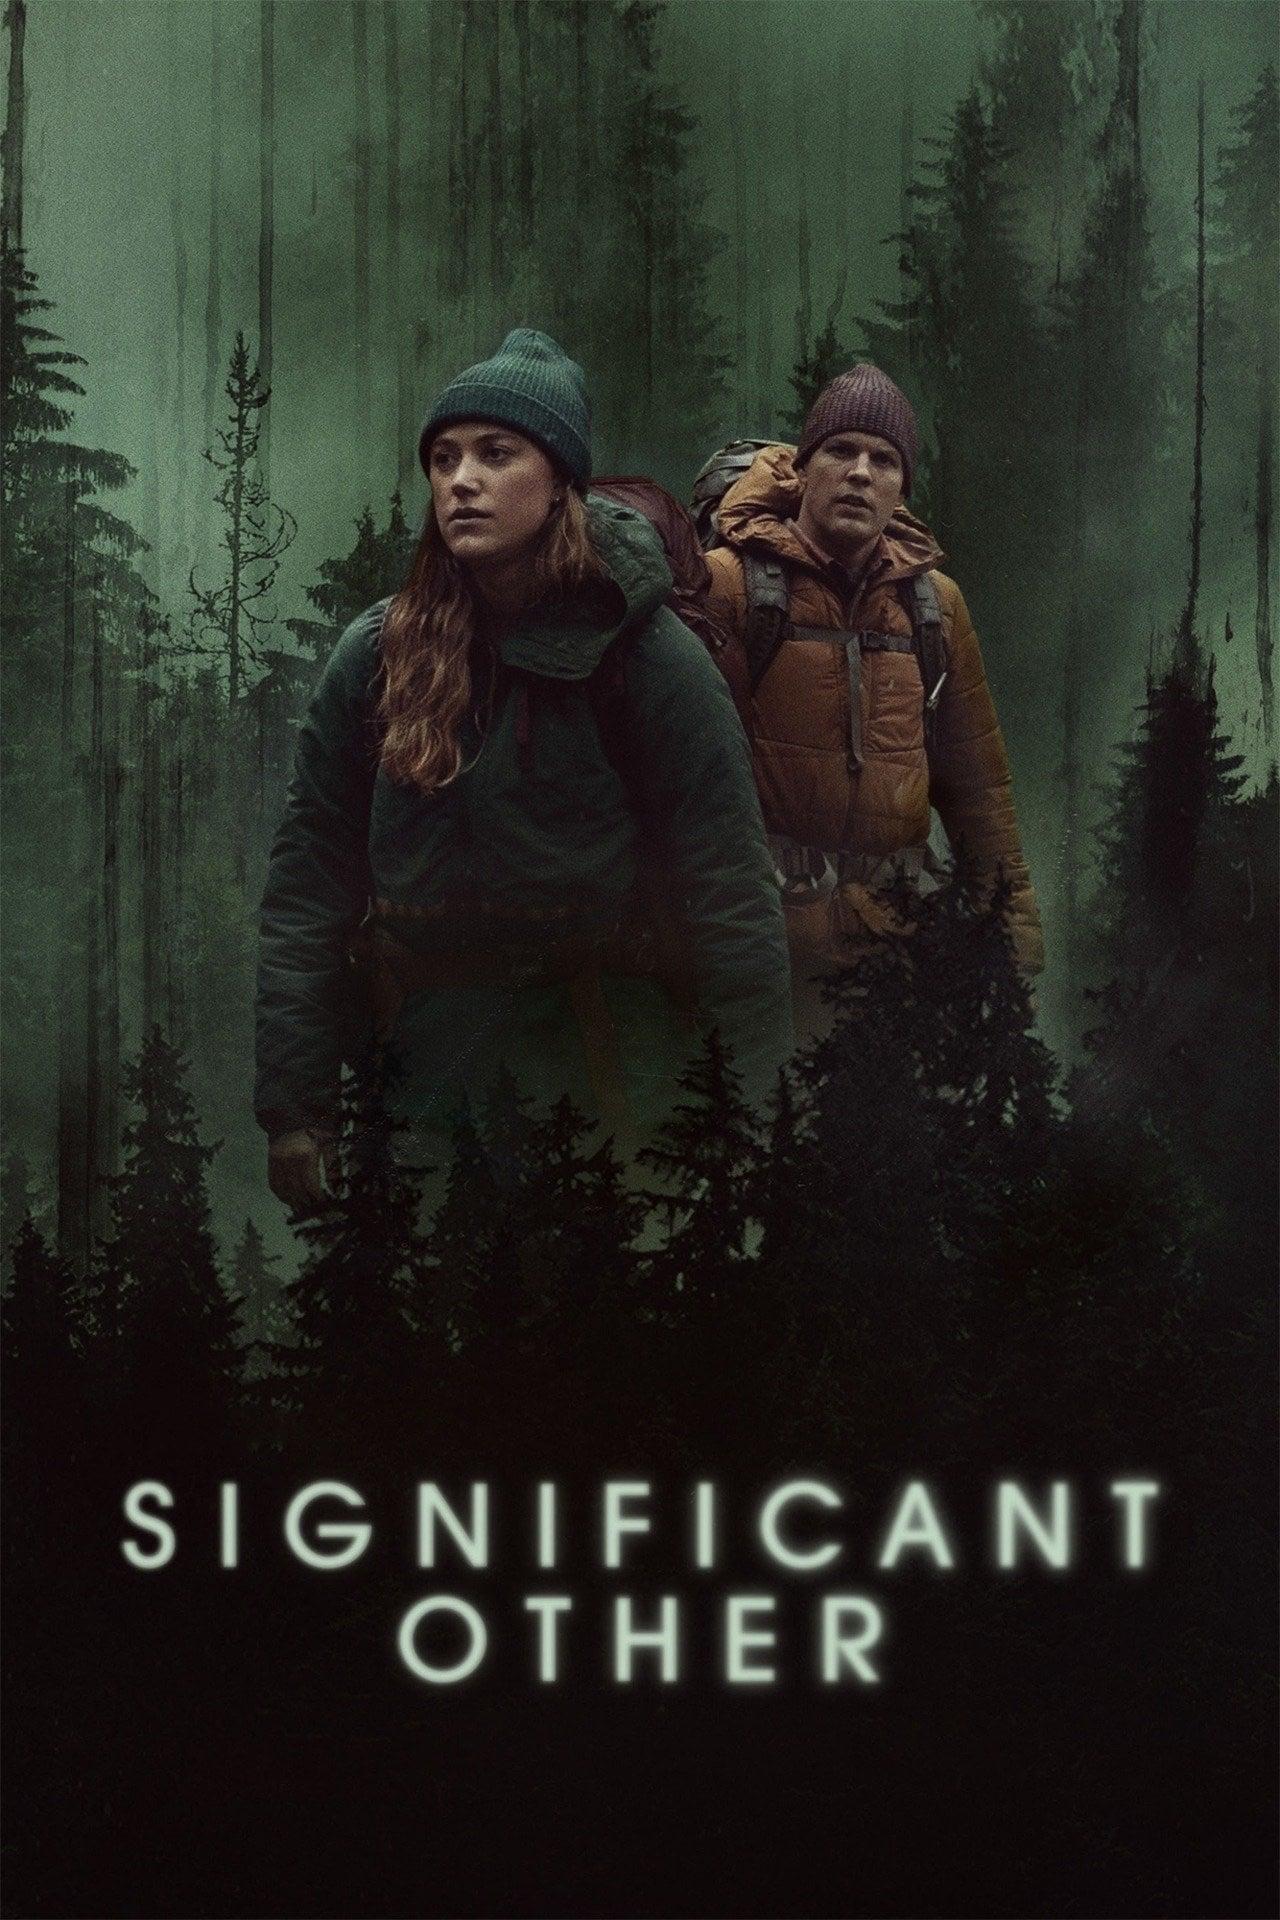 Significant Other poster